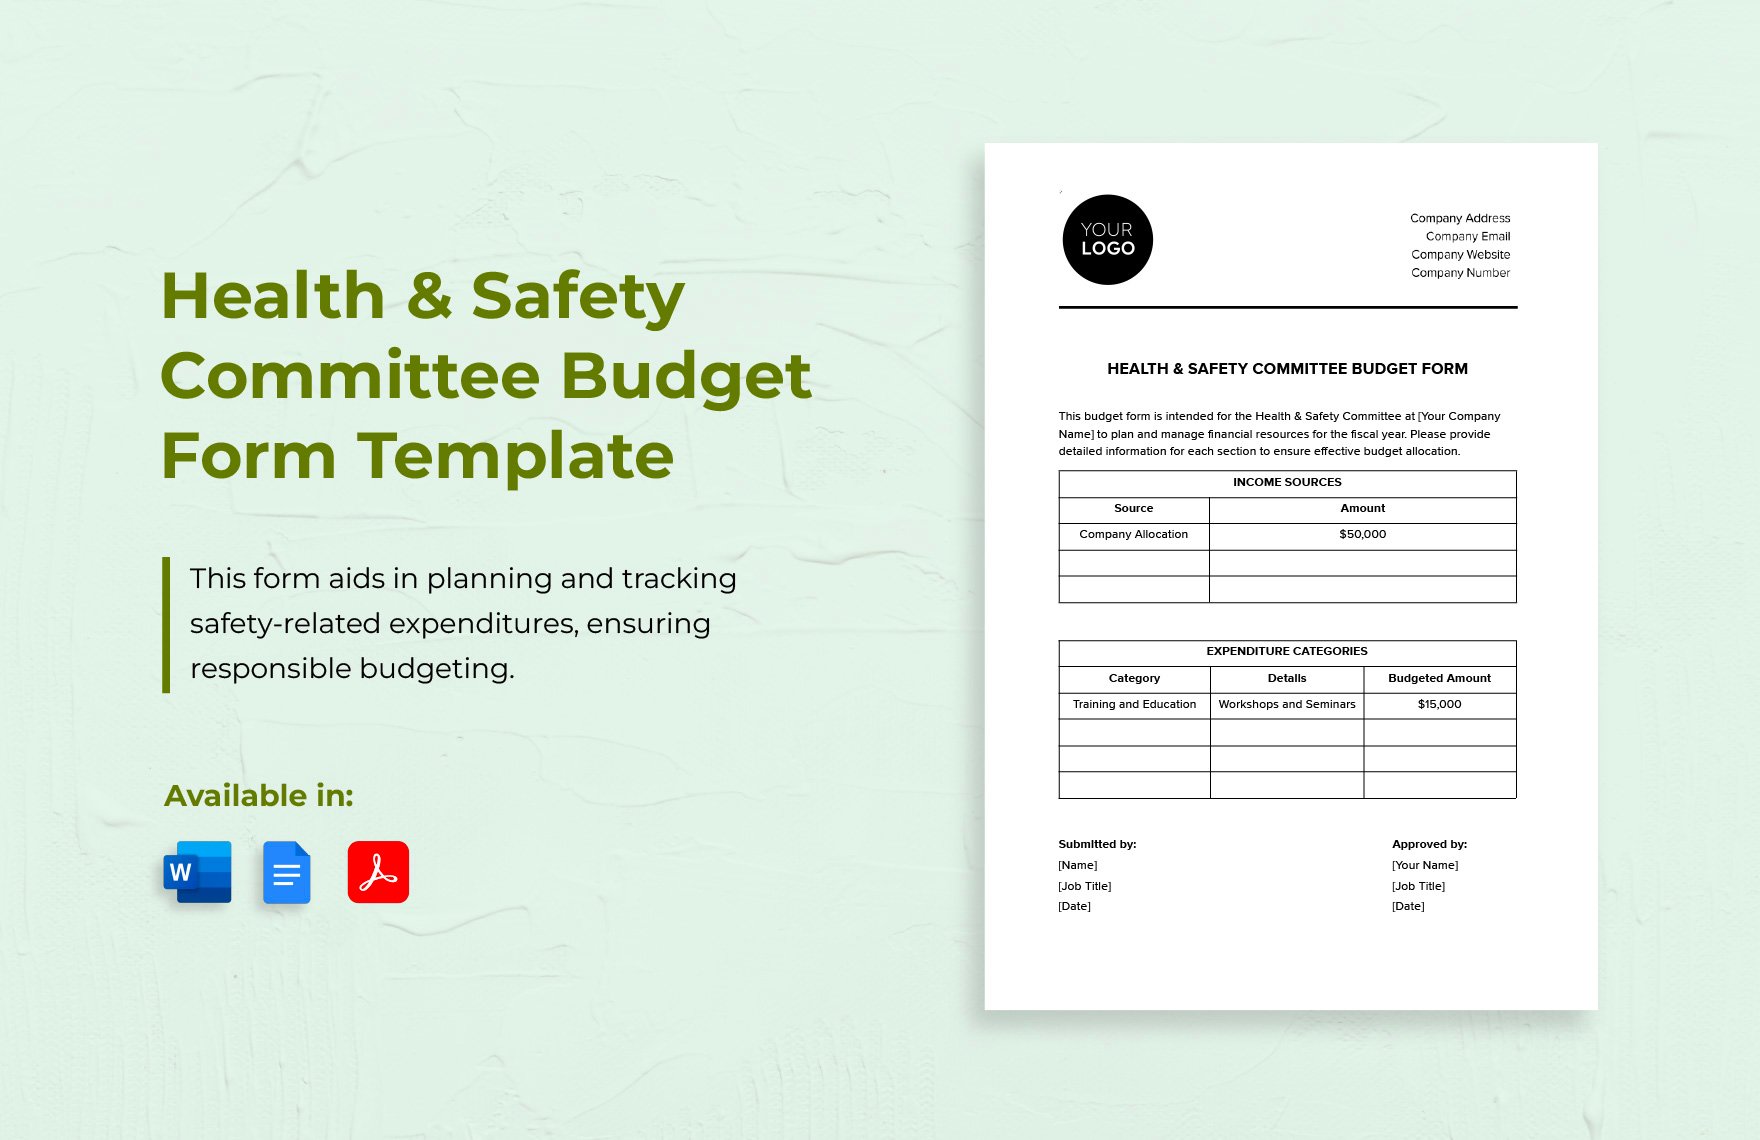 Health & Safety Committee Budget Form Template